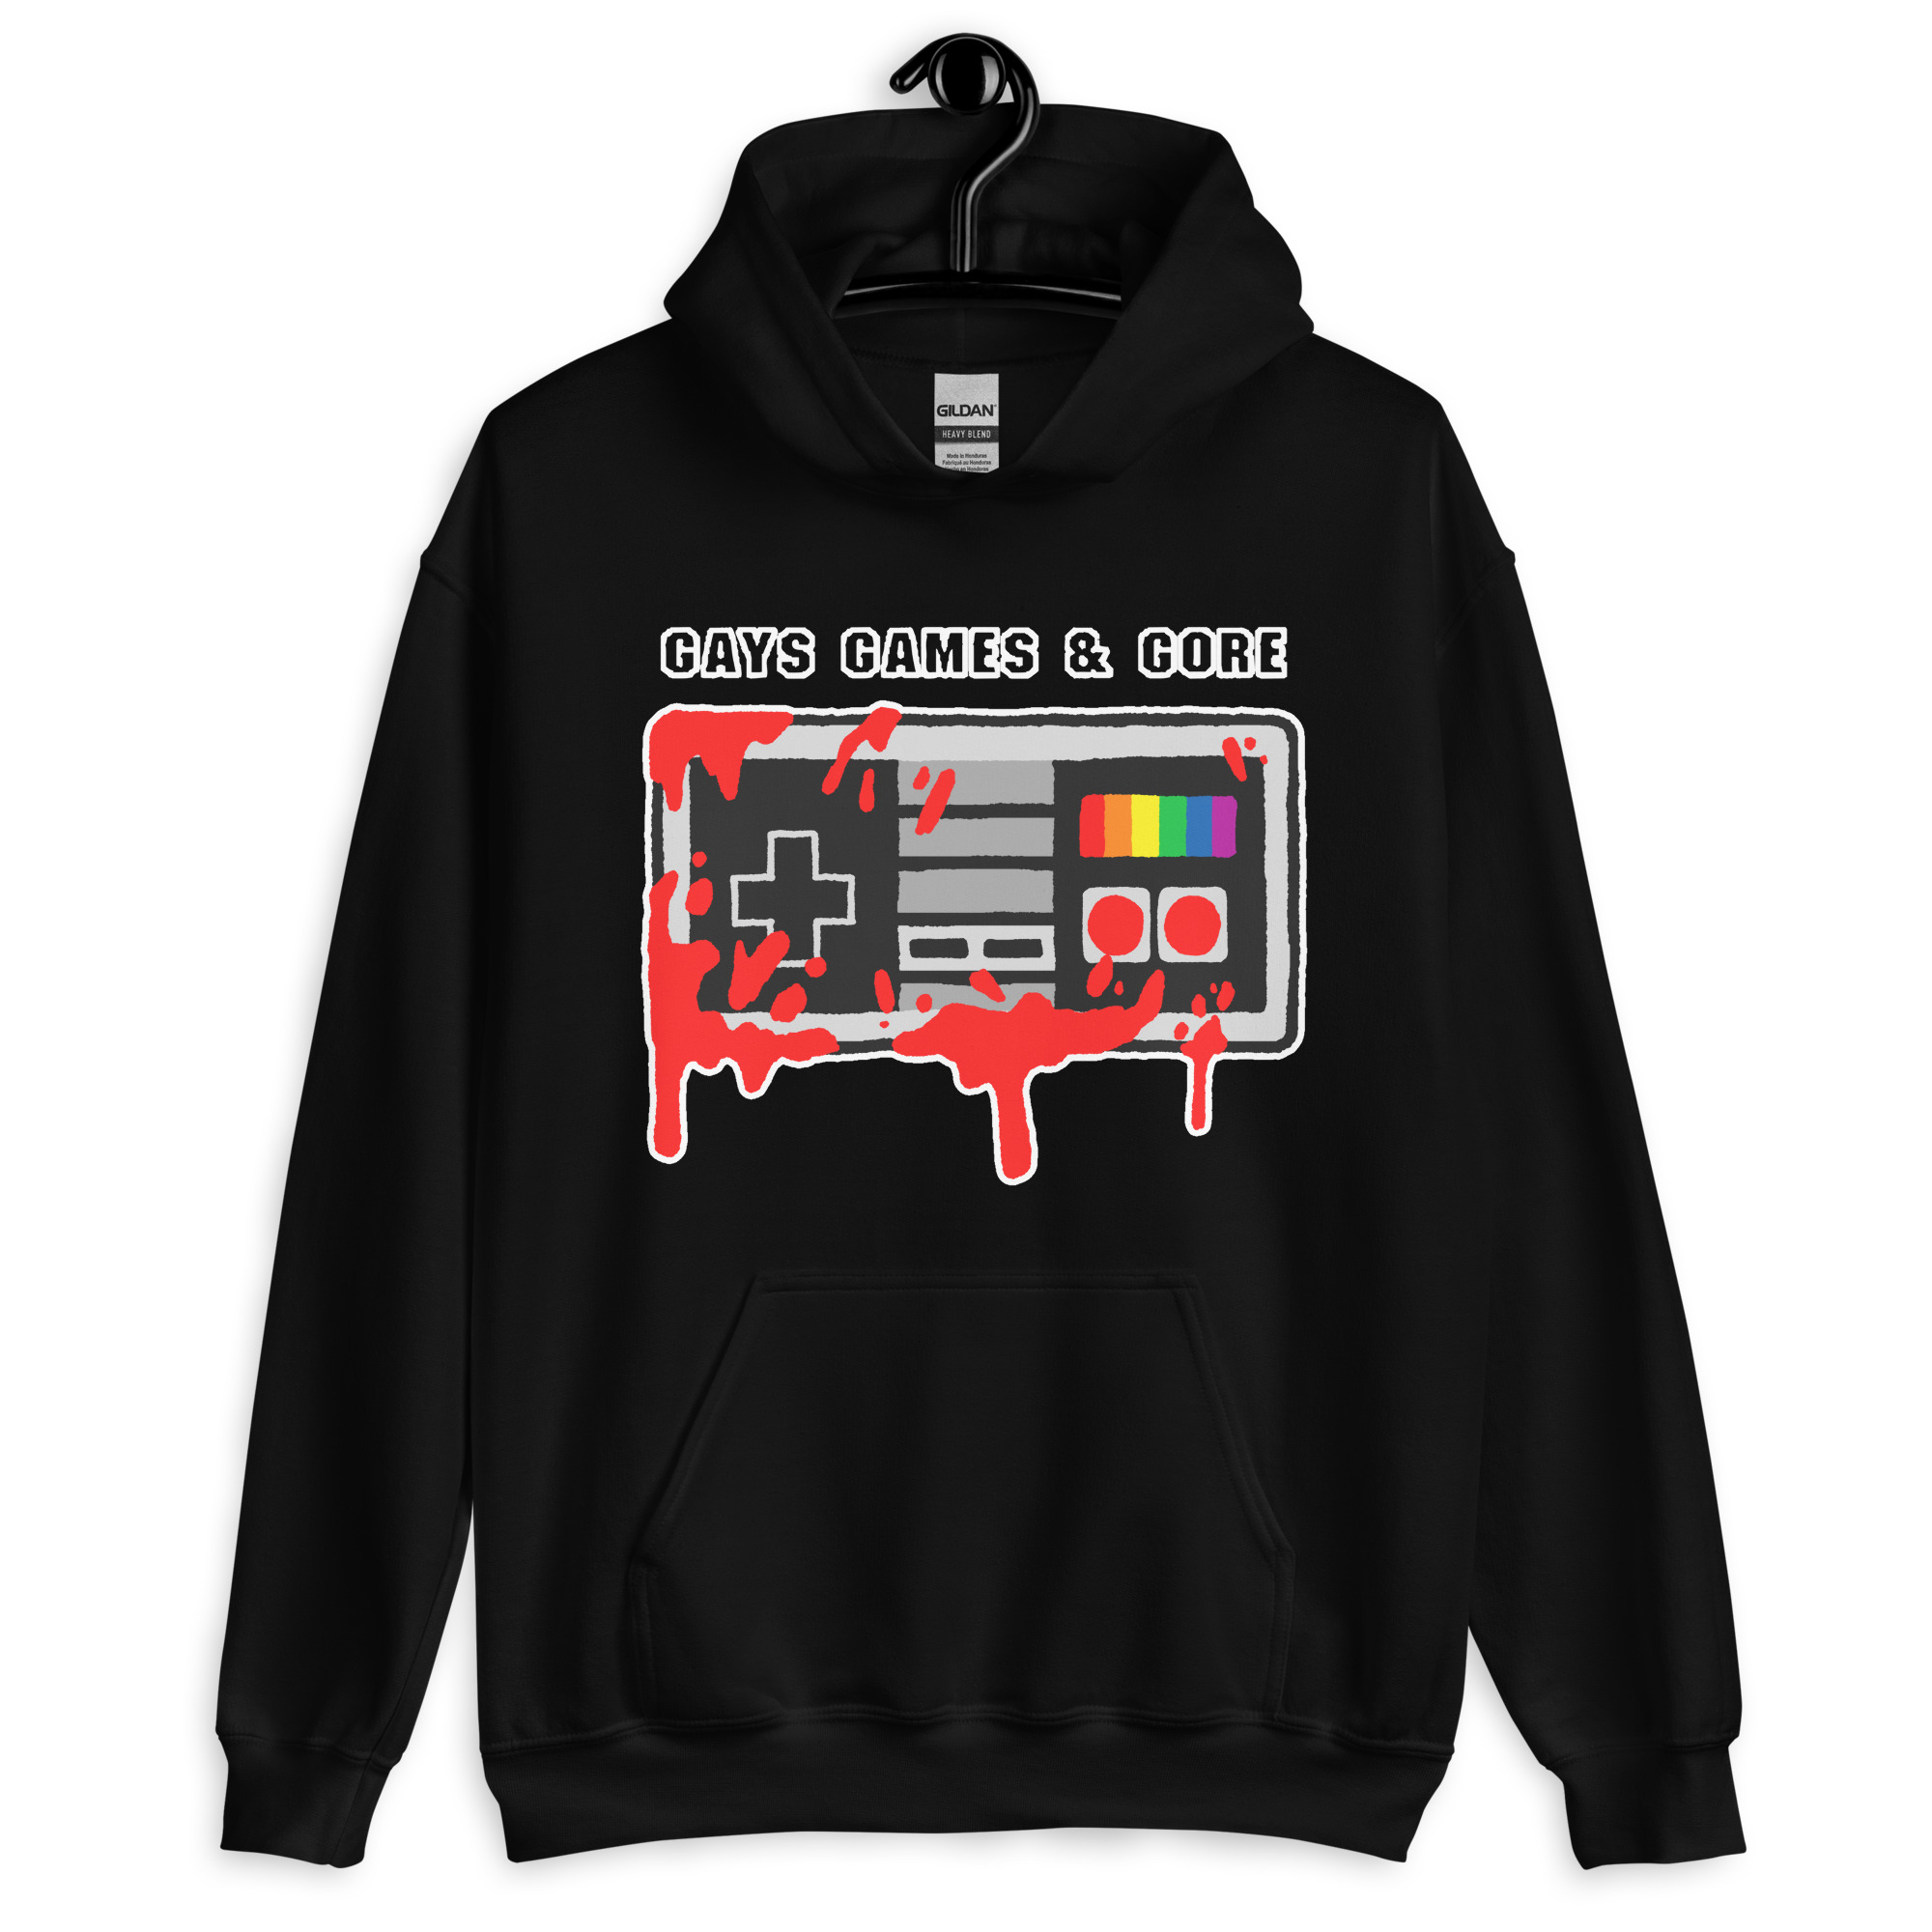 Featured image for “Gays Games & Gore - Unisex Gildan Hoodie”